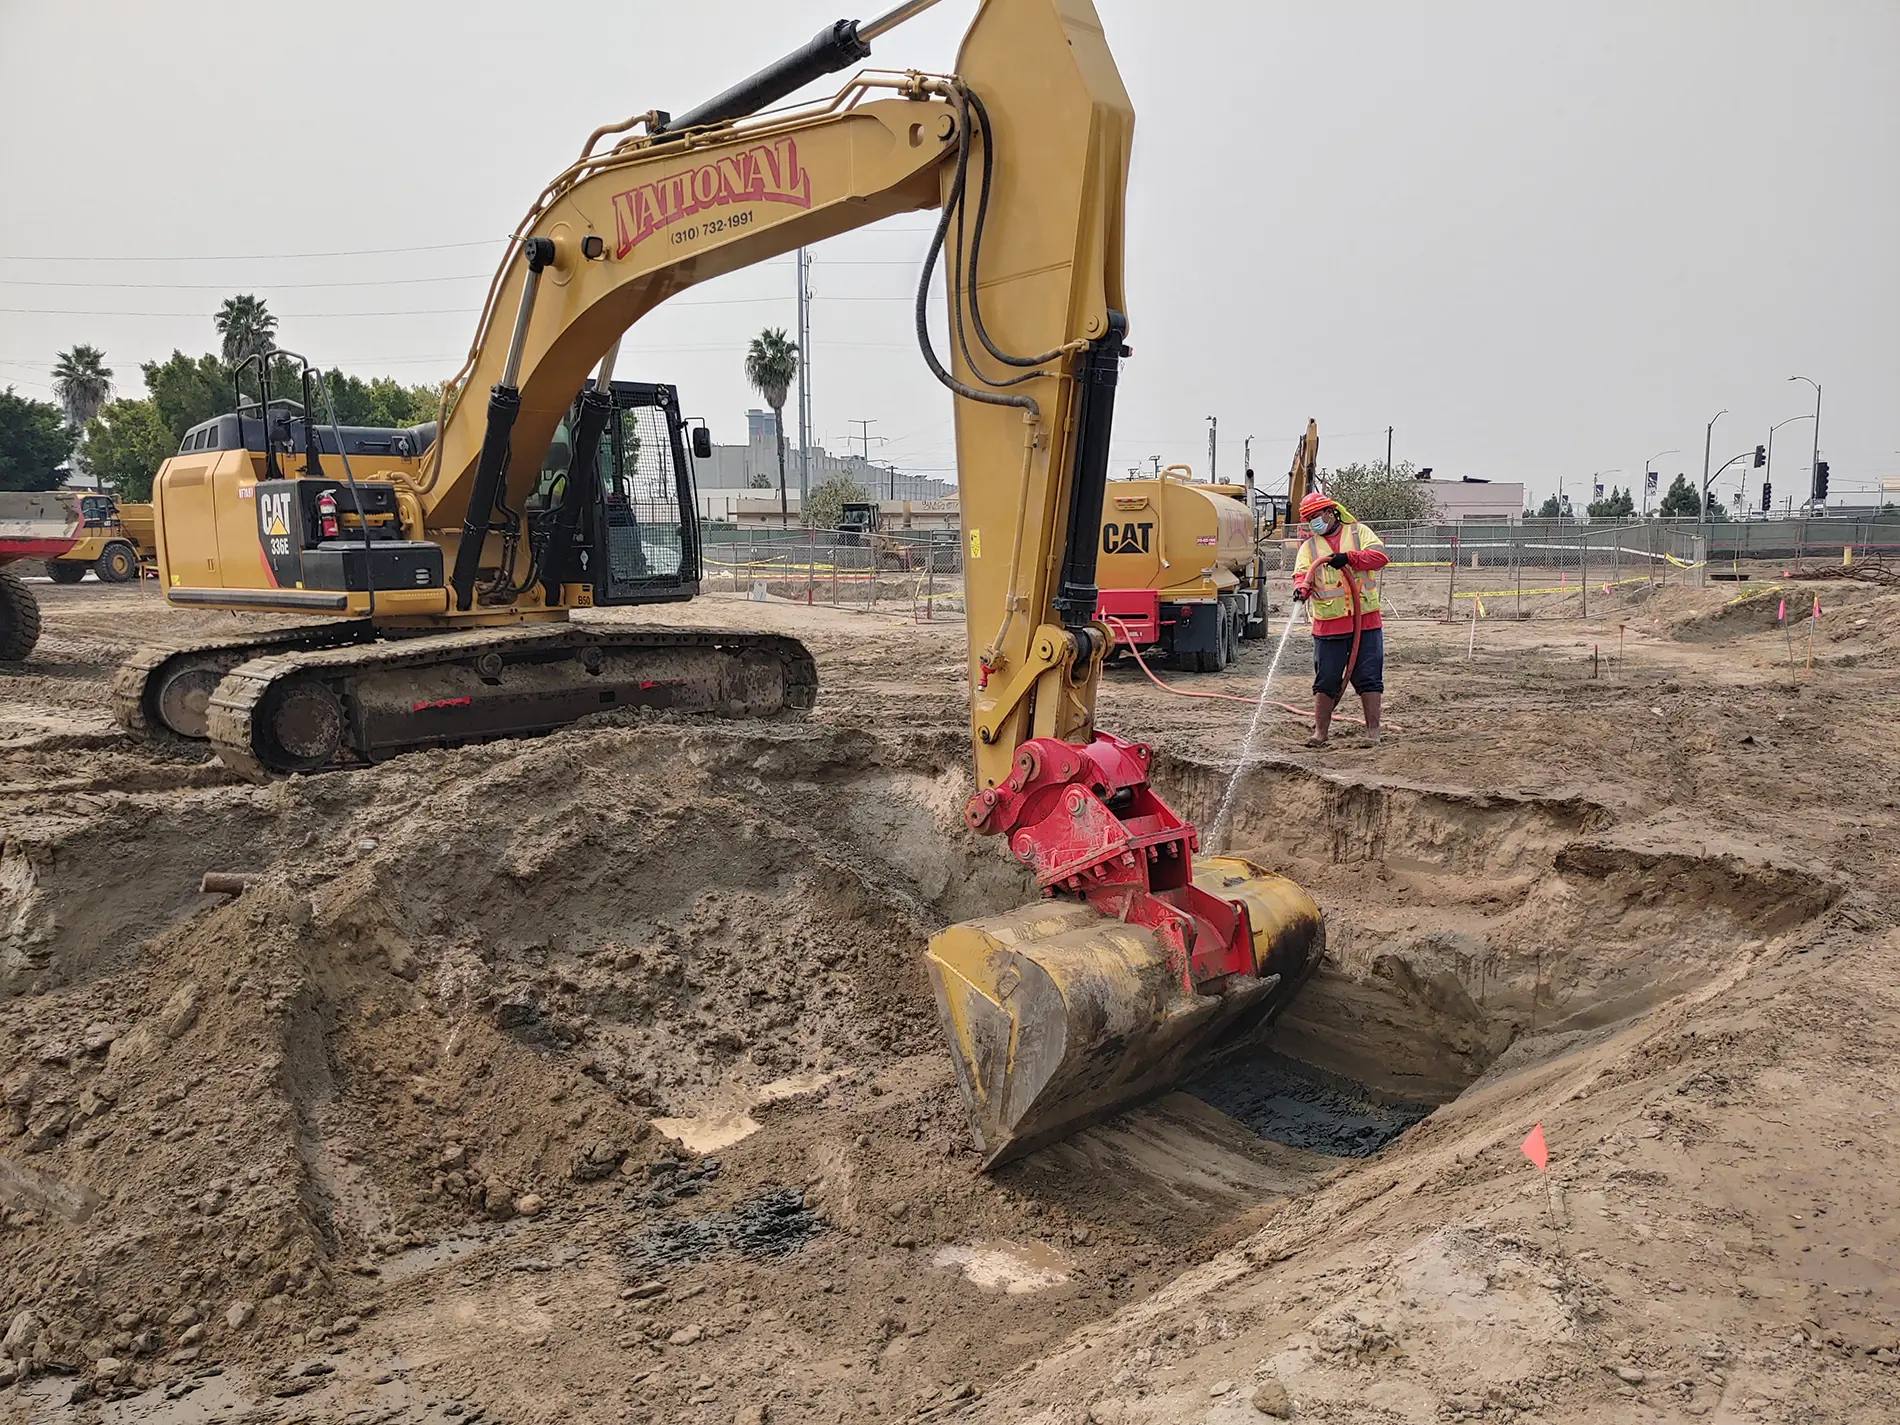 Apex team operating an excavator and heavy machinery to conduct excavation confirmation soil sampling at the contaminated Port of Los Angeles Avalon Triangle parcel.